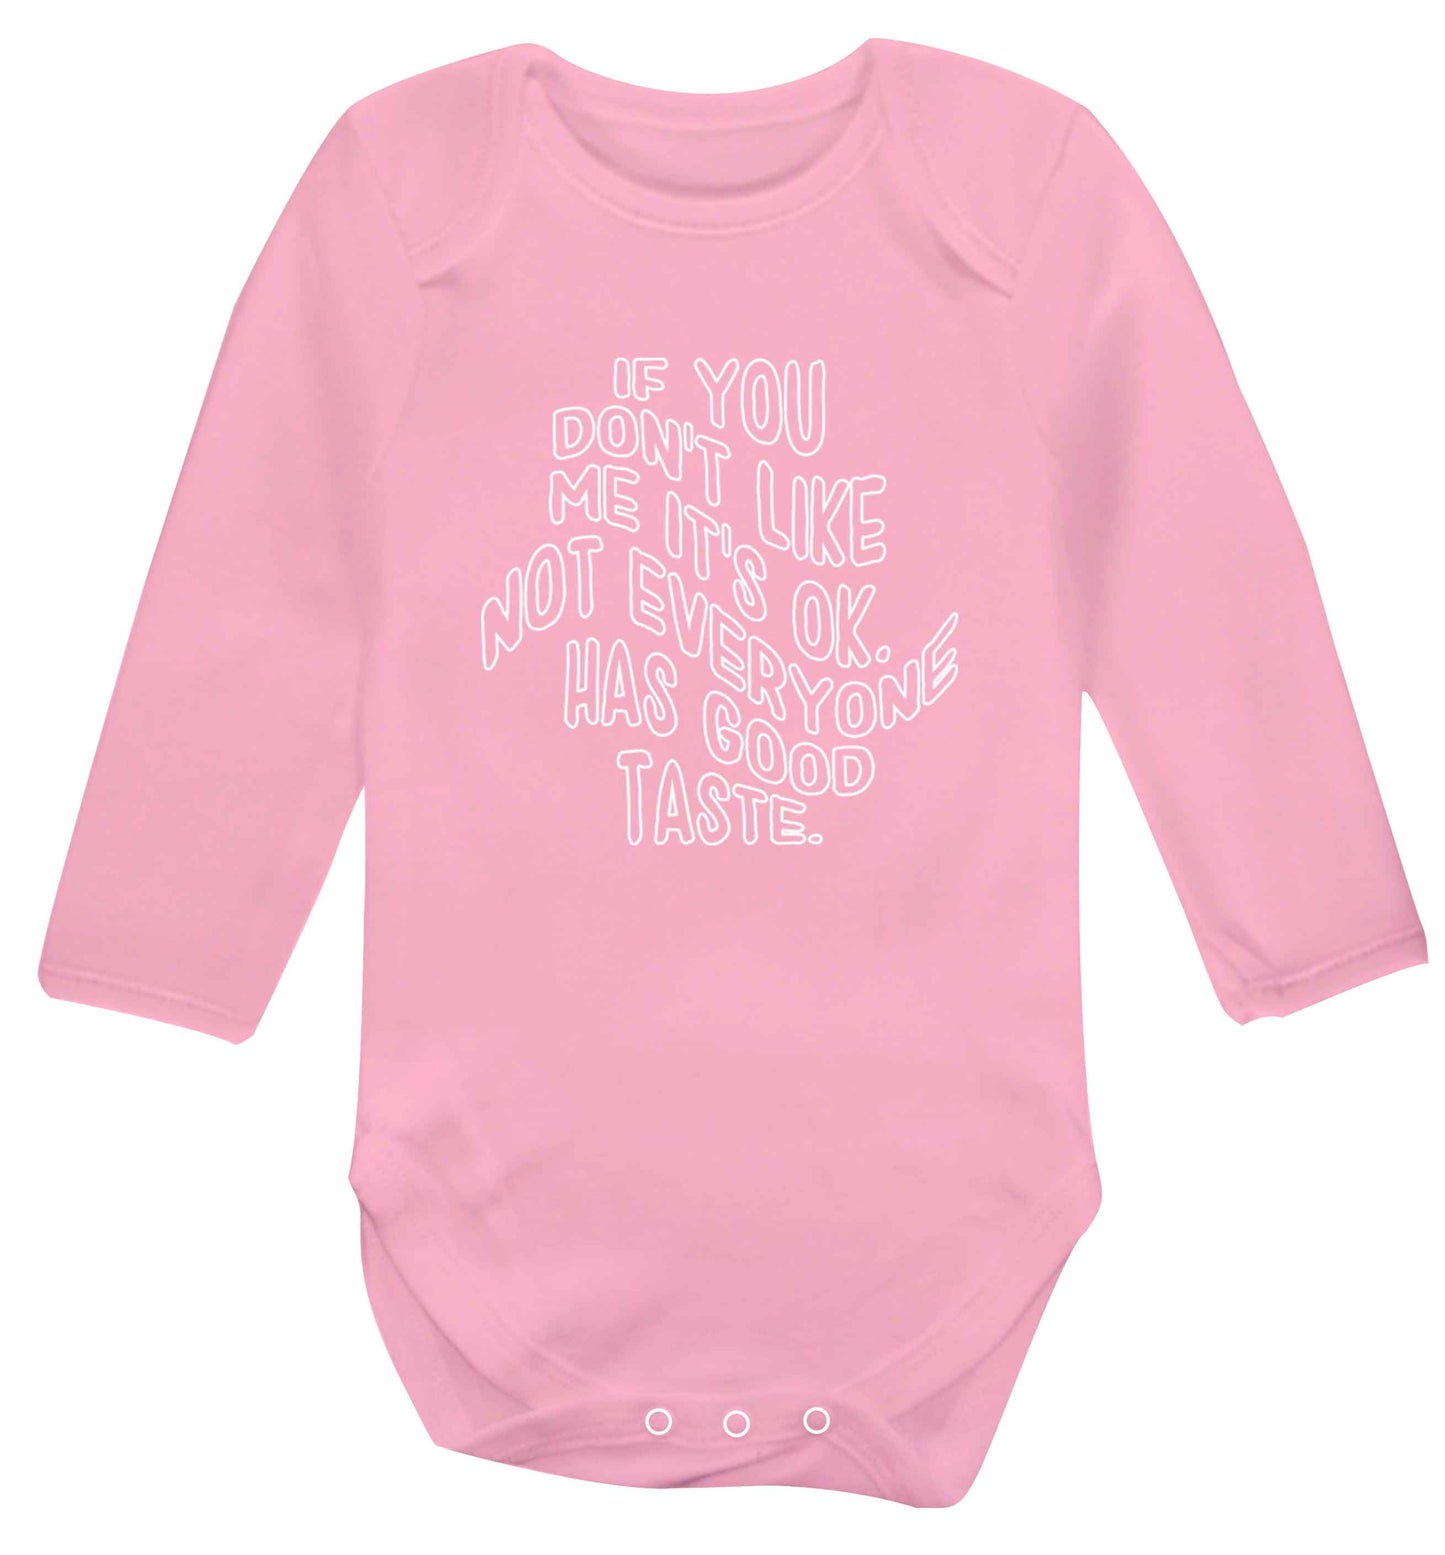 If you don't like me it's ok not everyone has good taste baby vest long sleeved pale pink 6-12 months